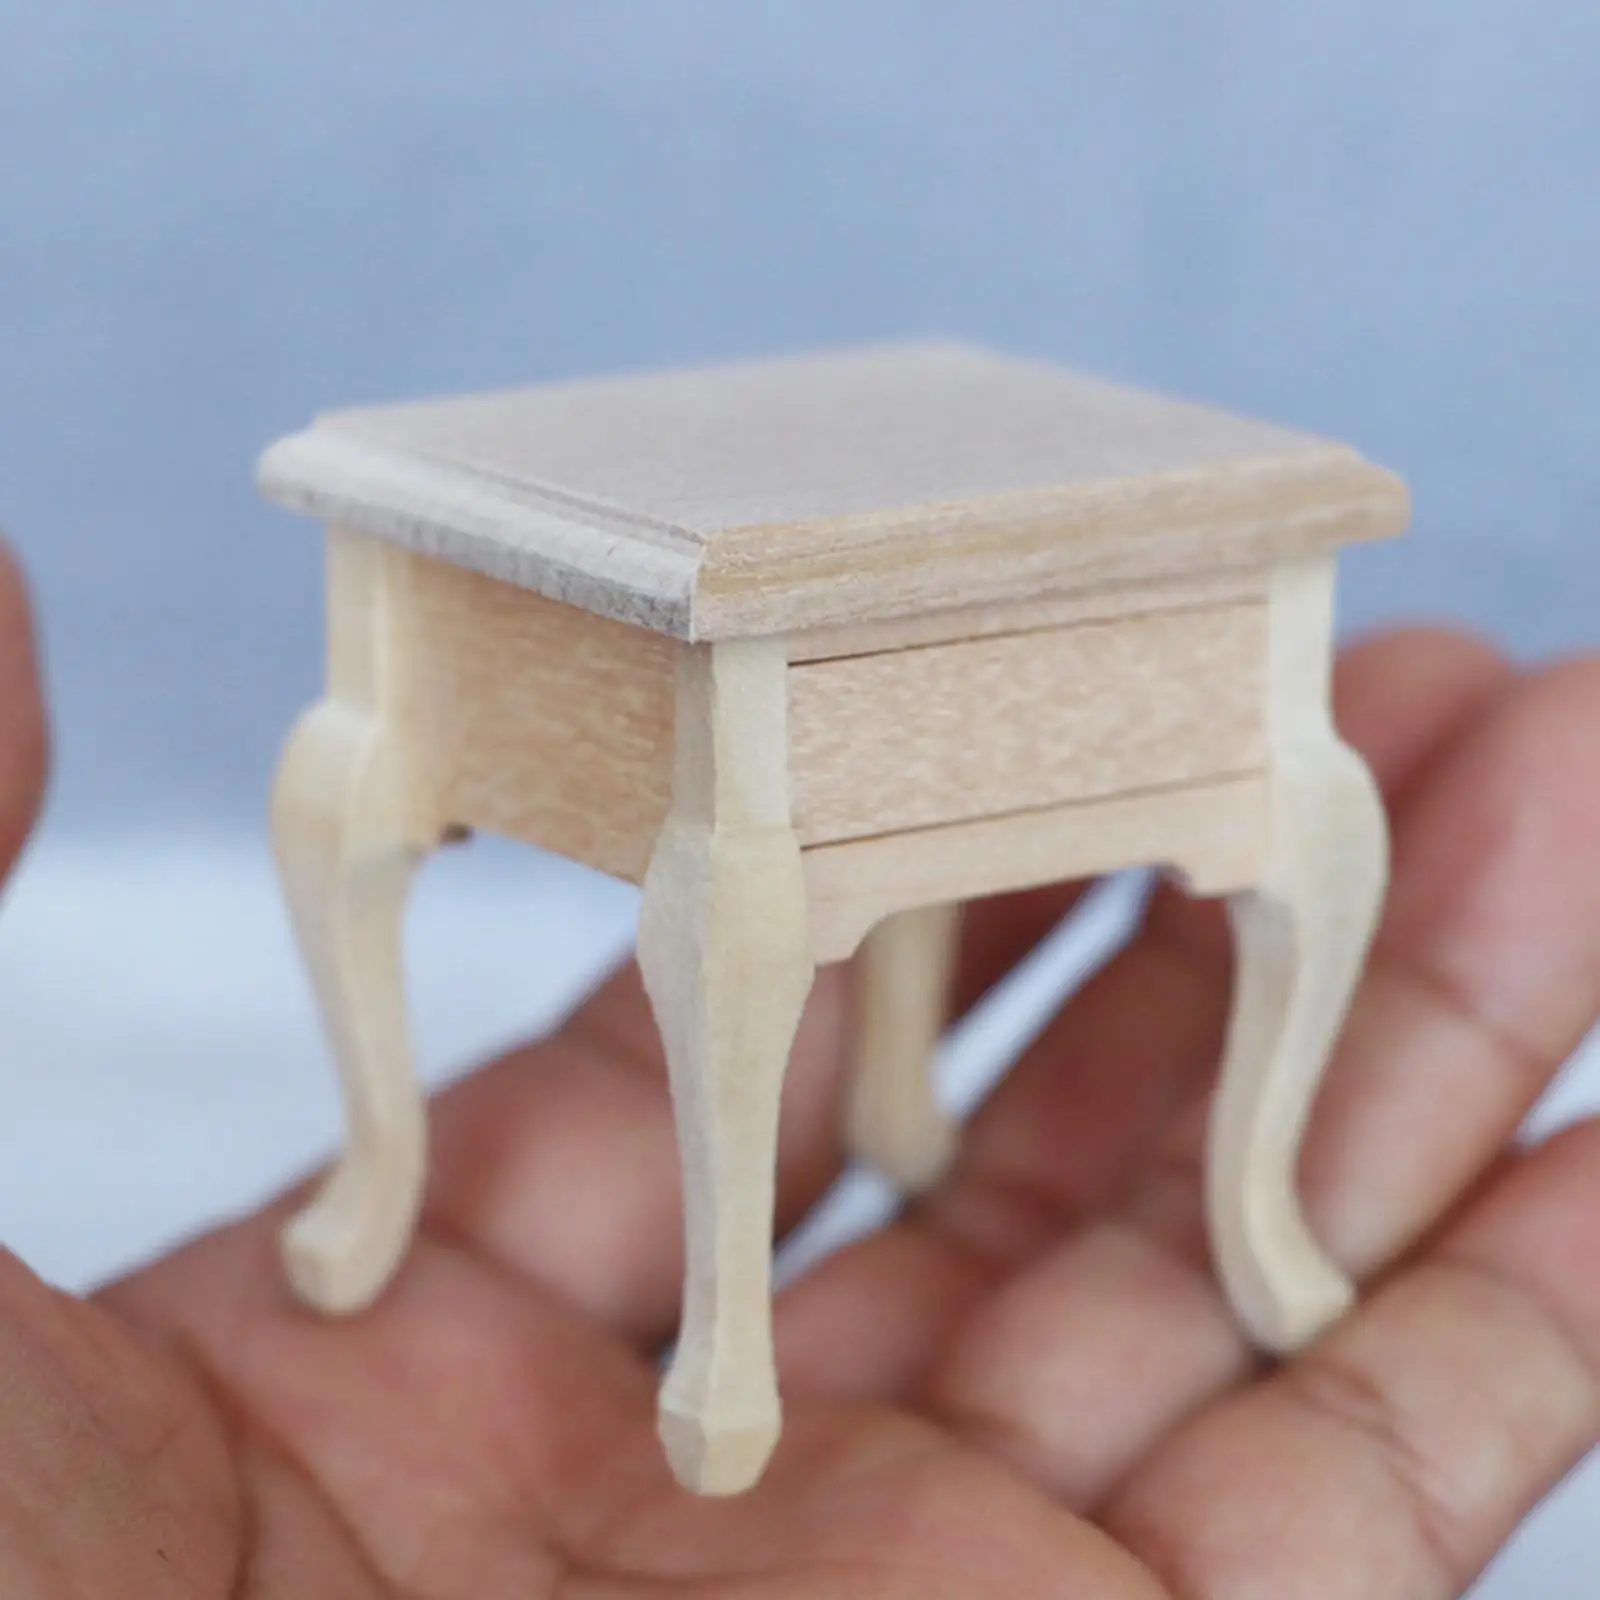 1/12 Dollhouse Wood NightStand DIY Photography Props Pretend Play Toy for Girls Children